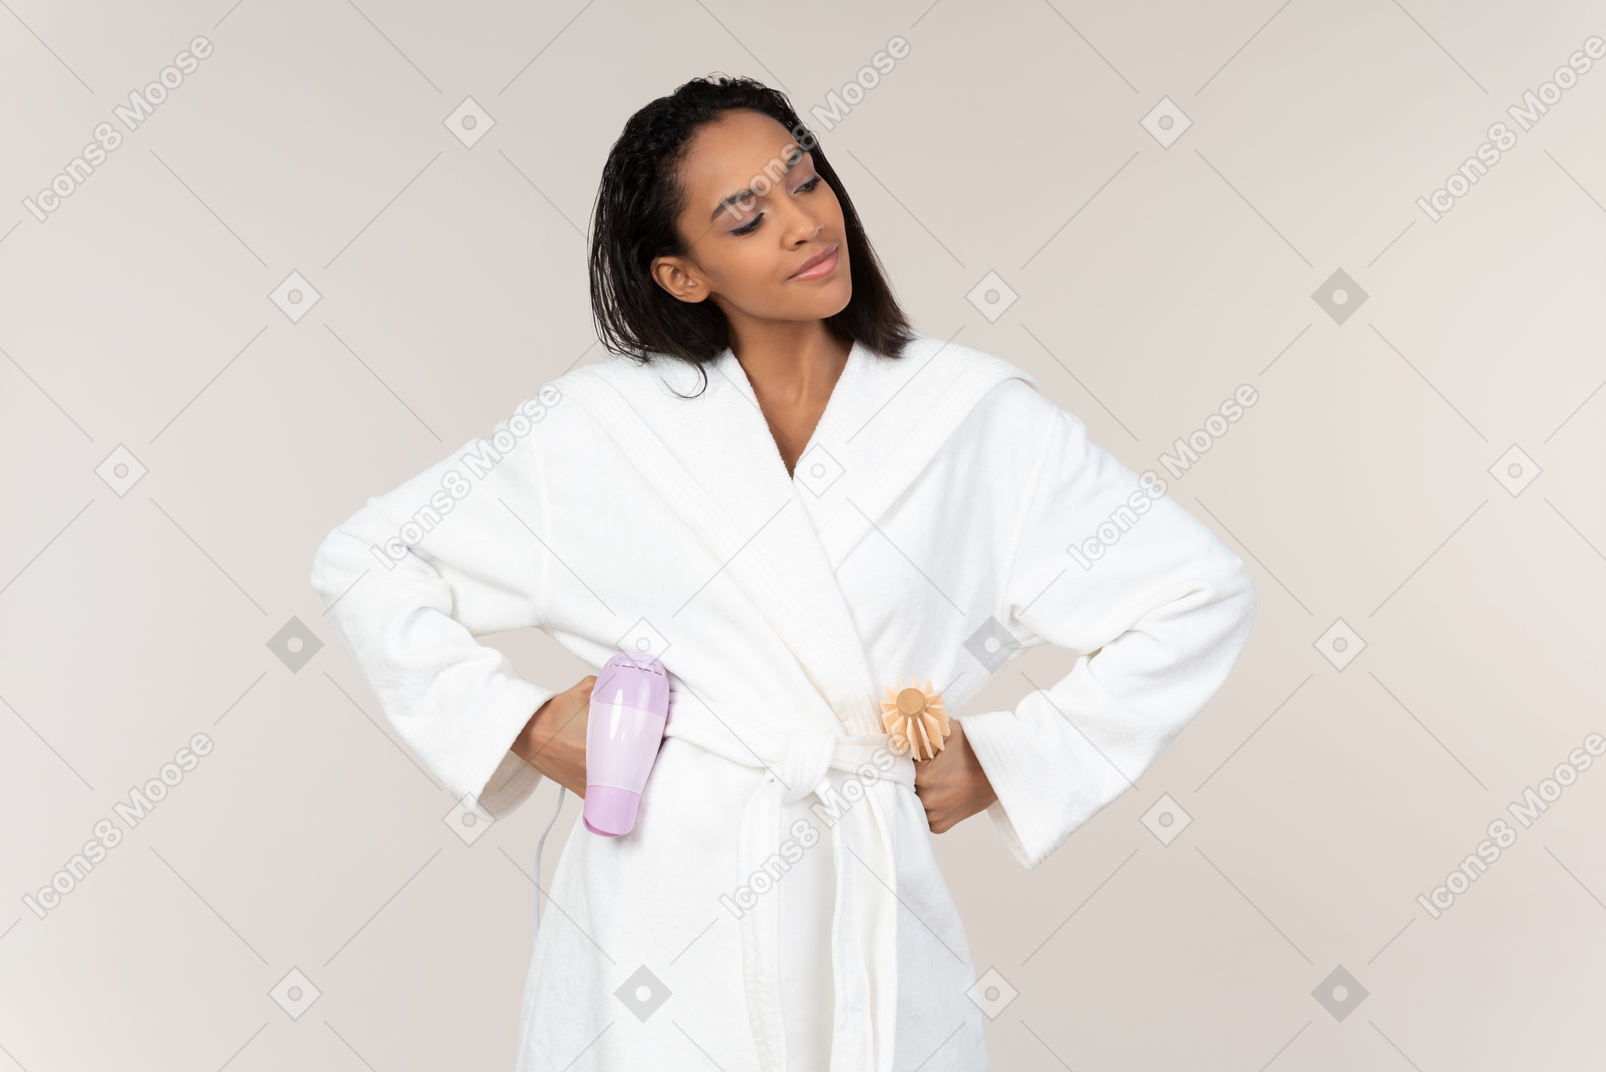 Positive afrowoman holding hair dryer and standing with hands on hips